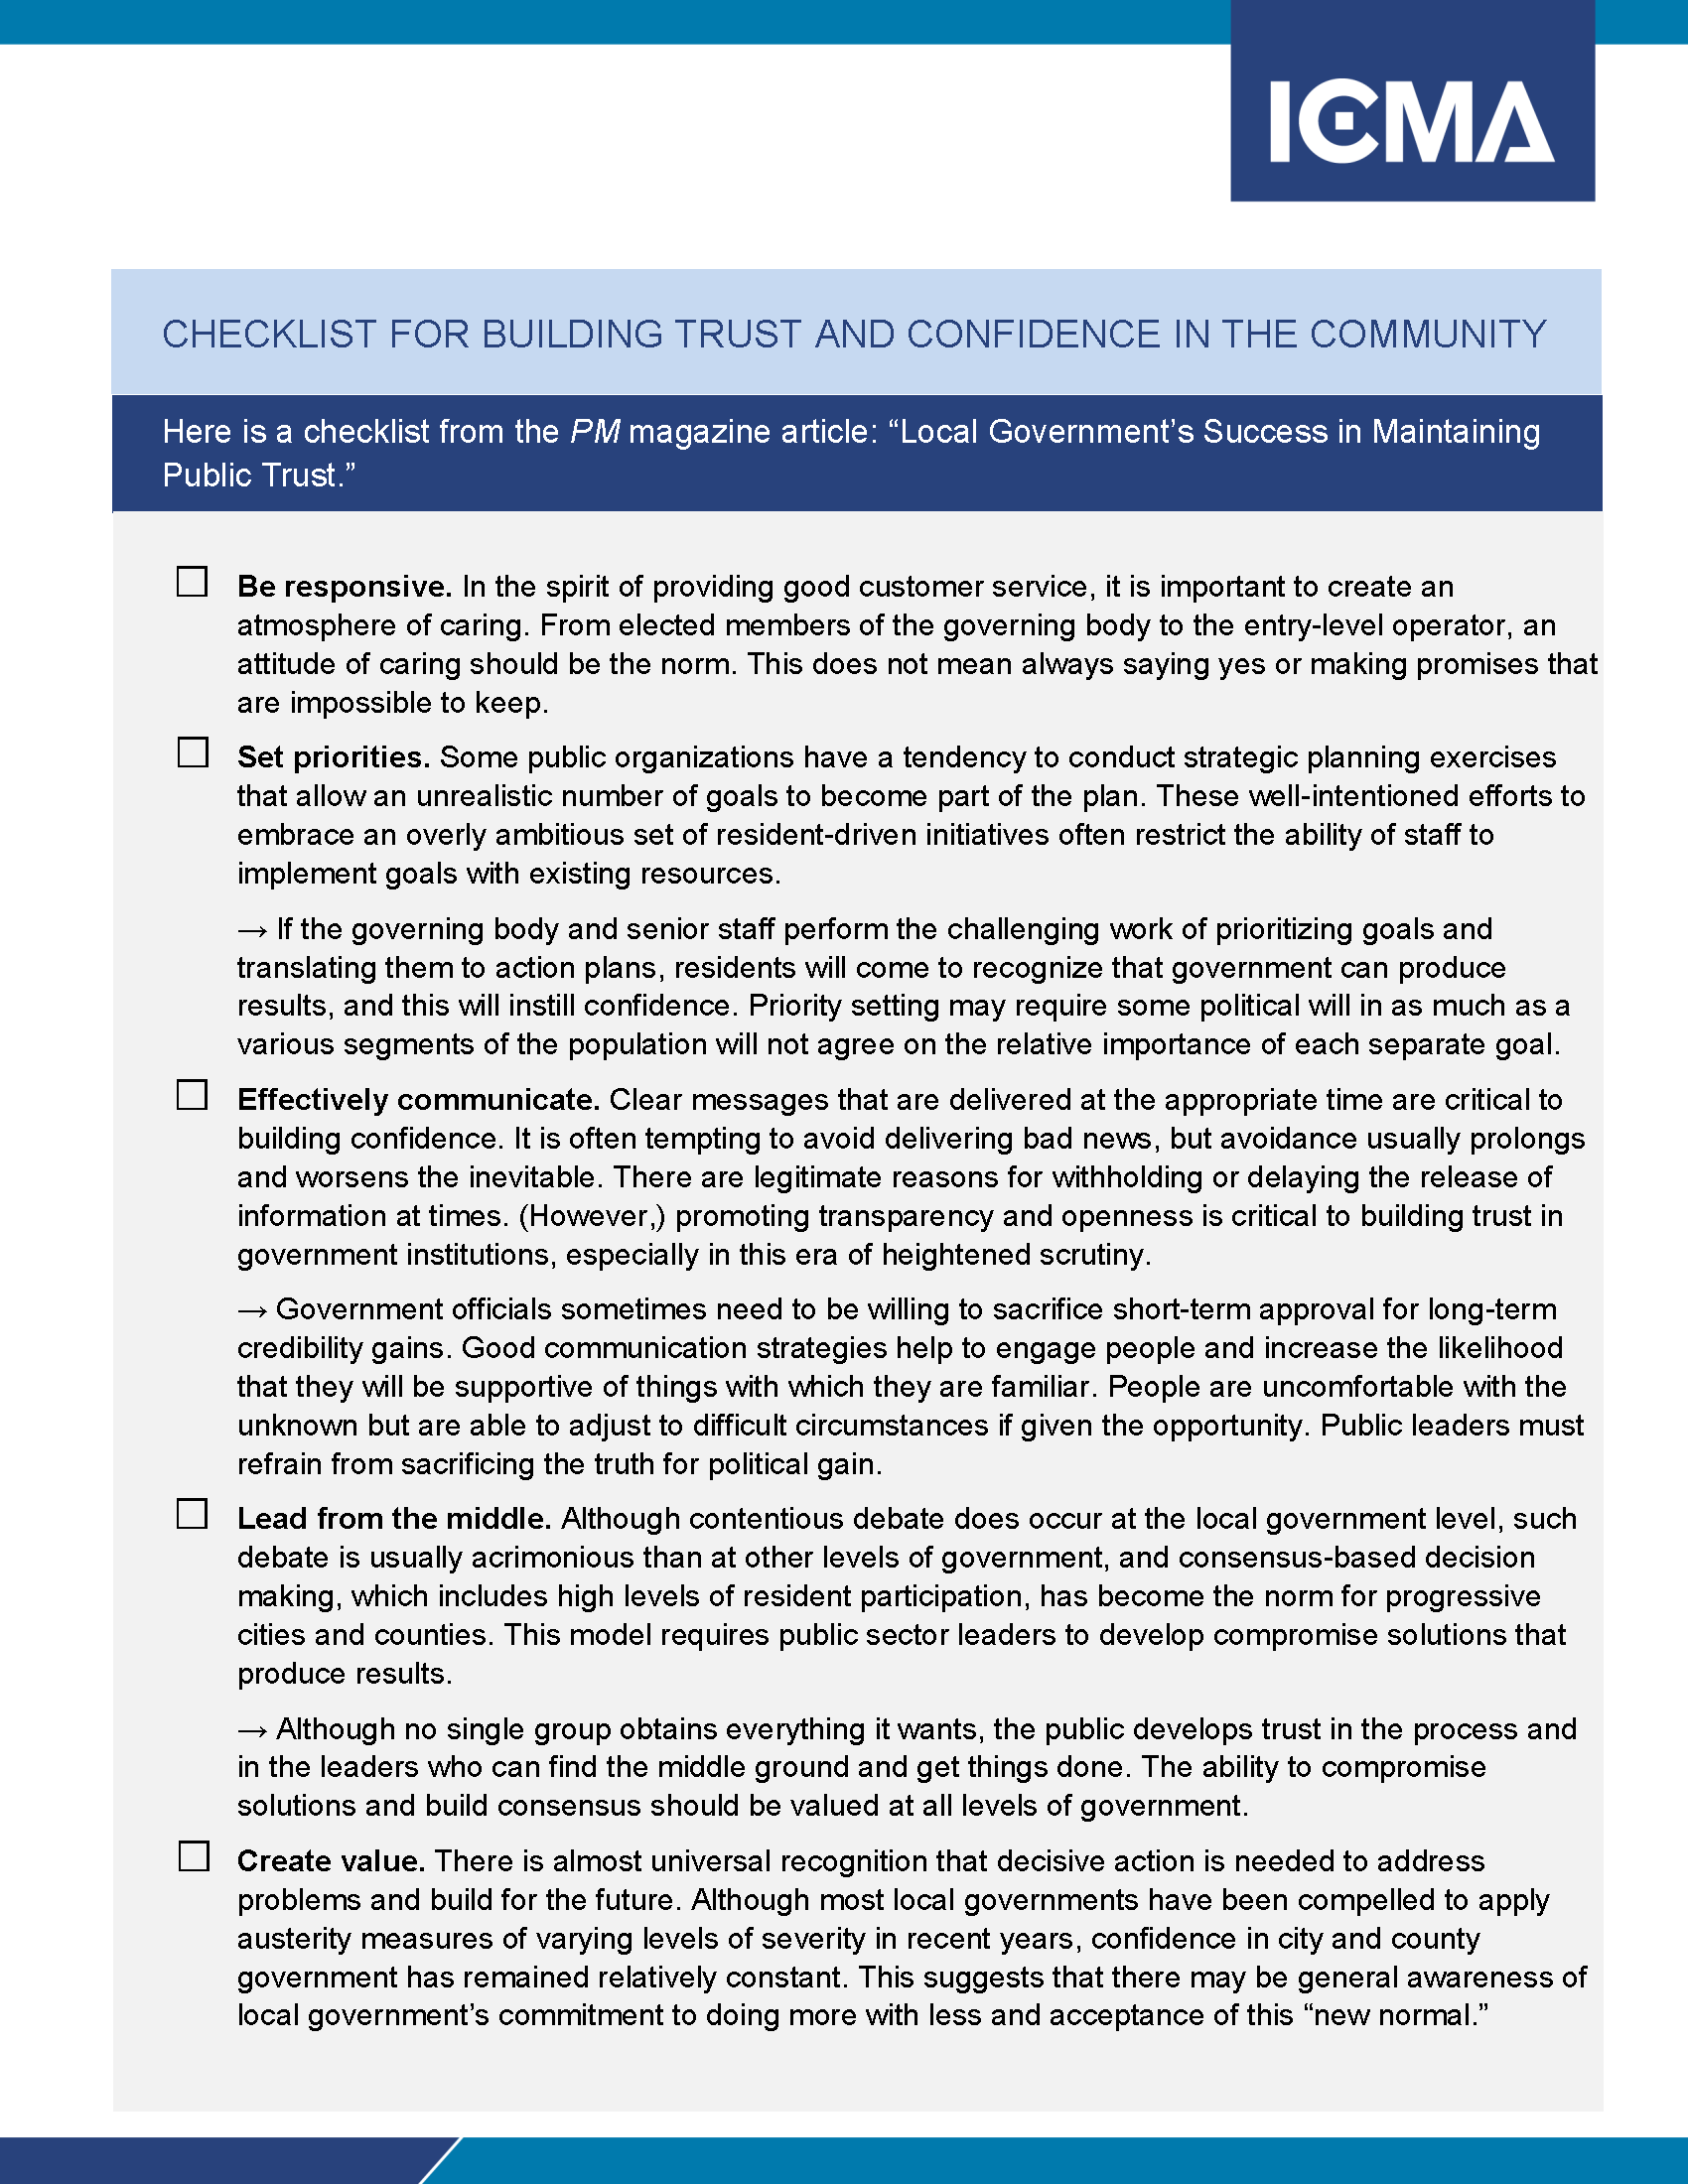 checklist-how-to-build-trust-and-confidence-in-the-community-icma